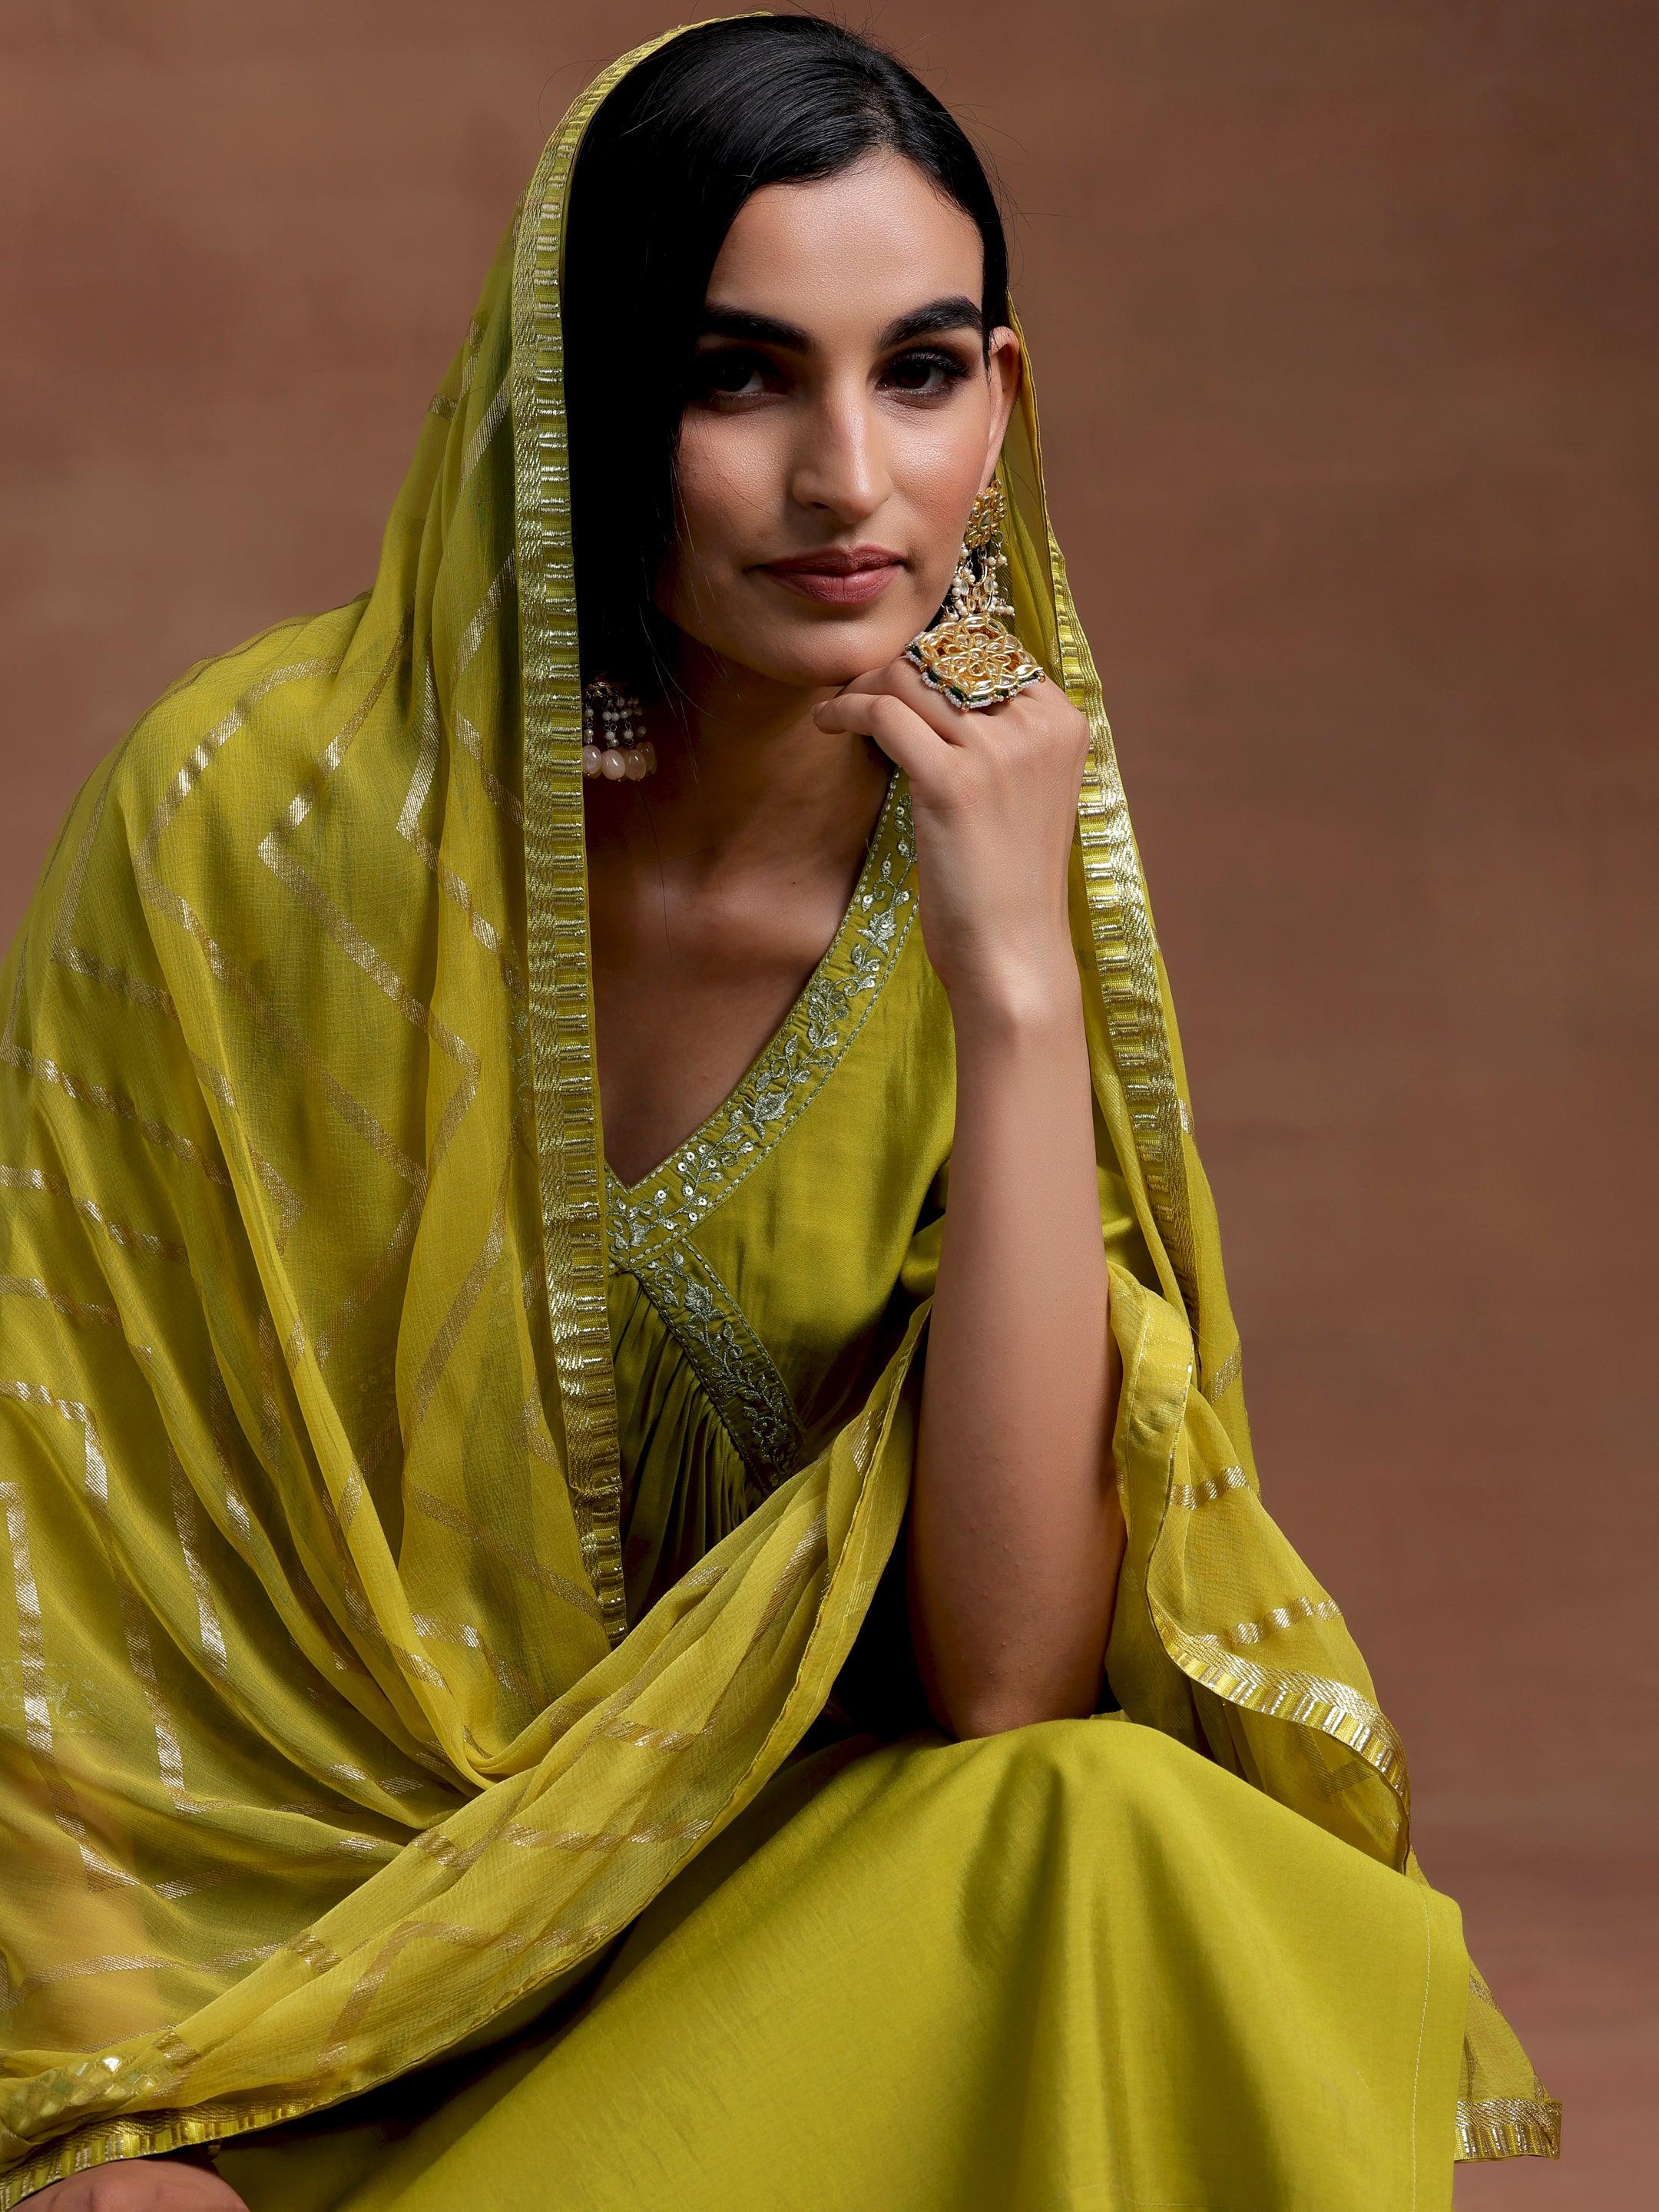 Olive Solid Silk Blend A-Line Kurta With Trousers & Dupatta